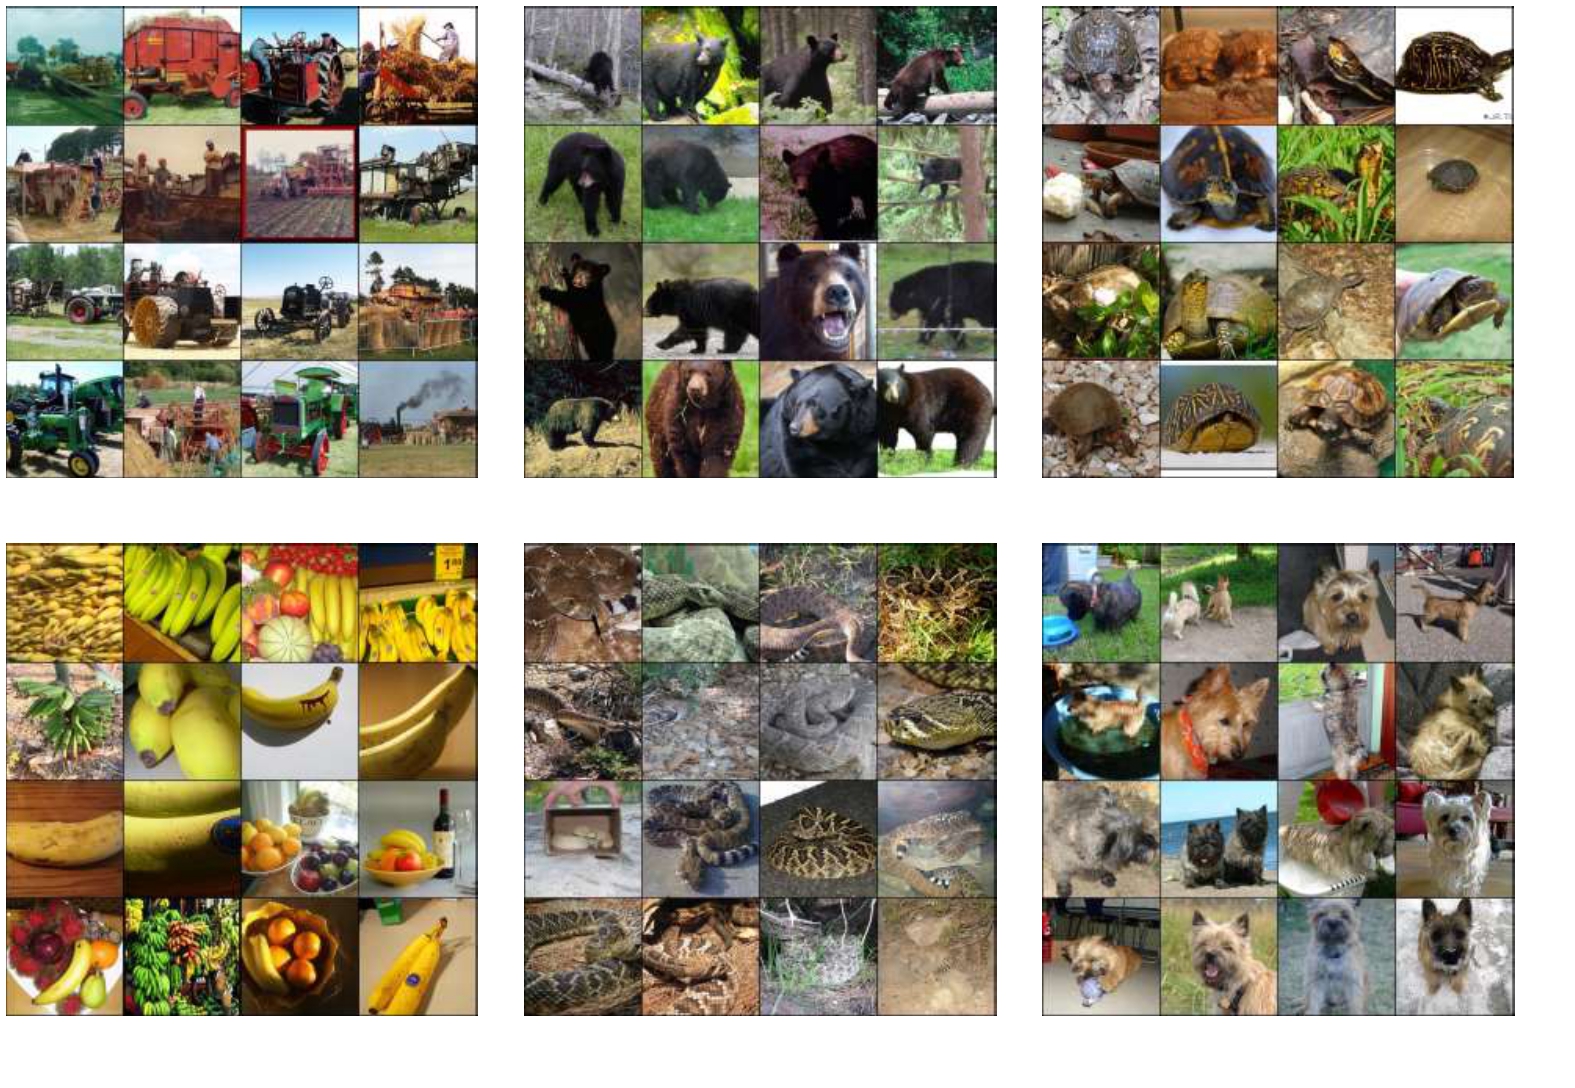 Examples of the clusters found by DeepDPM on the ImageNet dataset